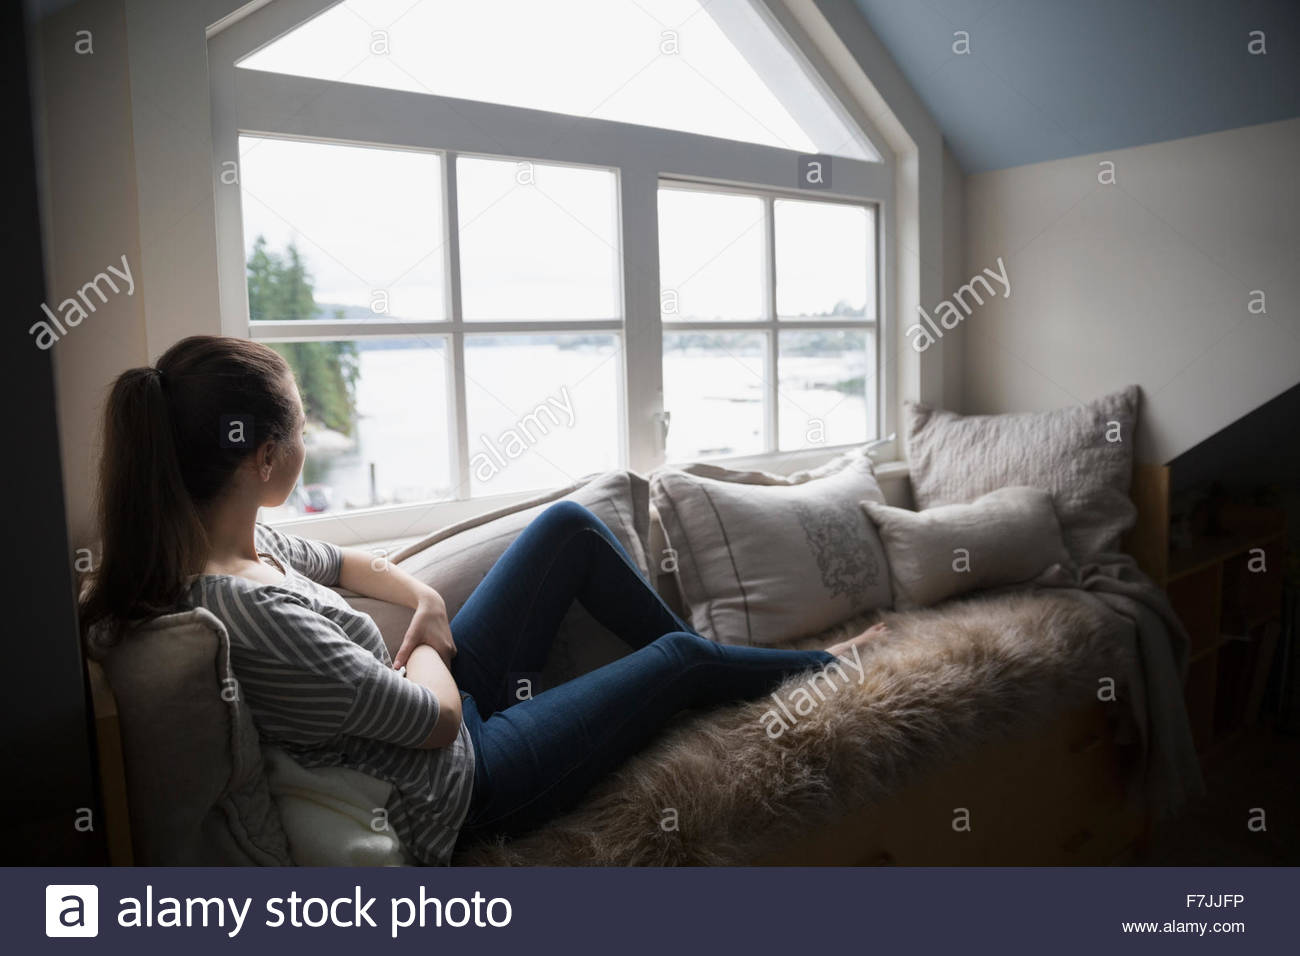 Pensive young woman looking out window lake view Stock Photo